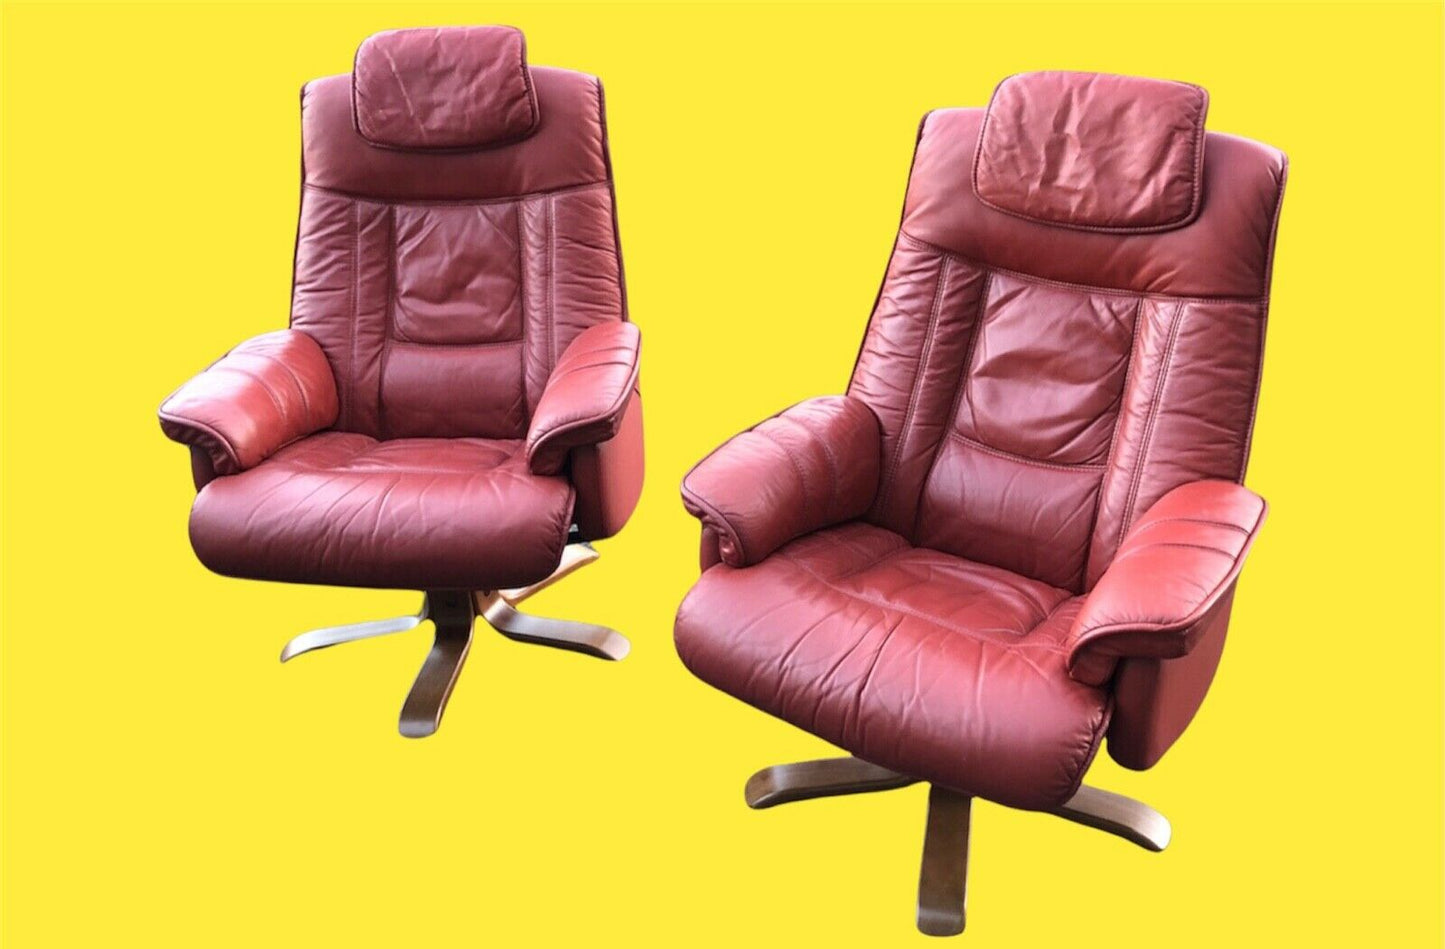 Stunning Pair Of Red Leather Reclining Armchairs With Matching Stools ( SOLD )